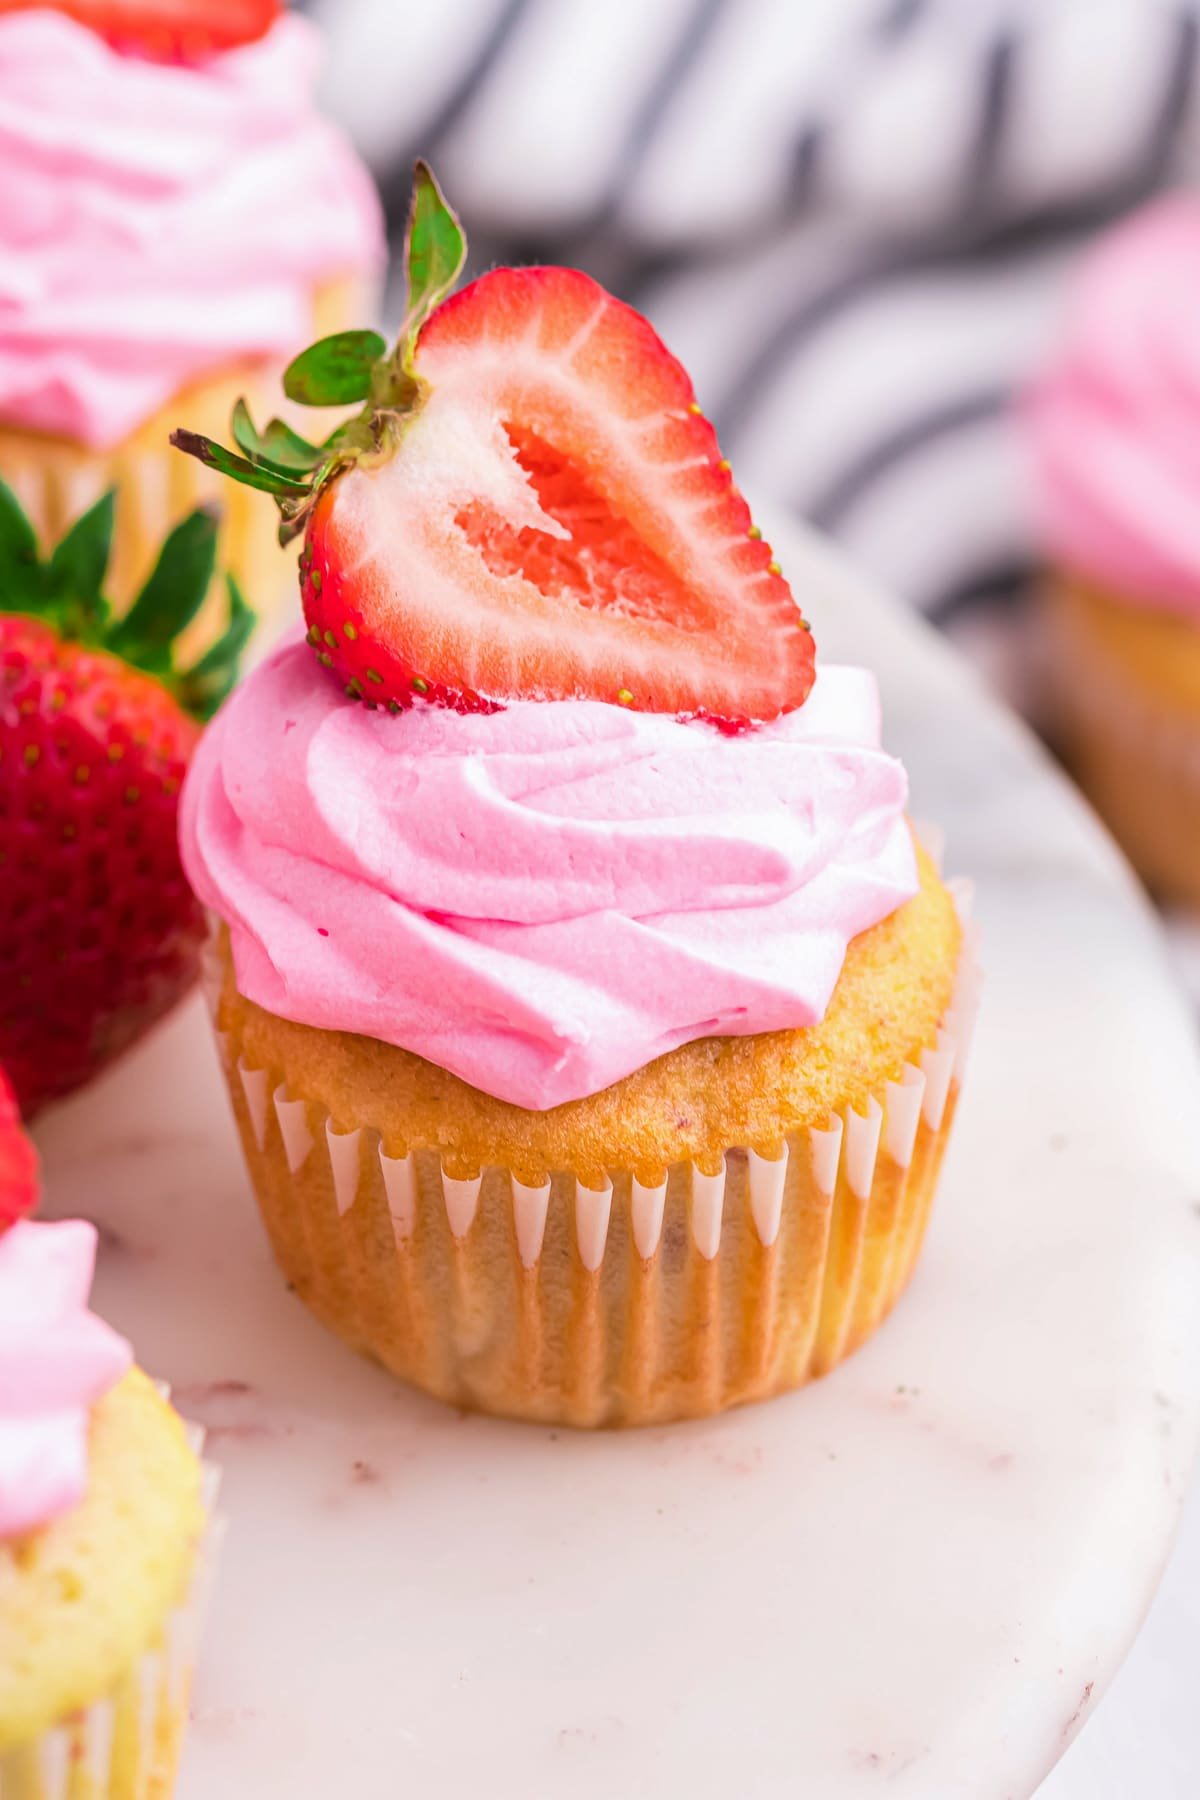 45 degree angle showing a Strawberry Cupcakes sitting on a white marble cake stand with other cupcakes in the back ground.